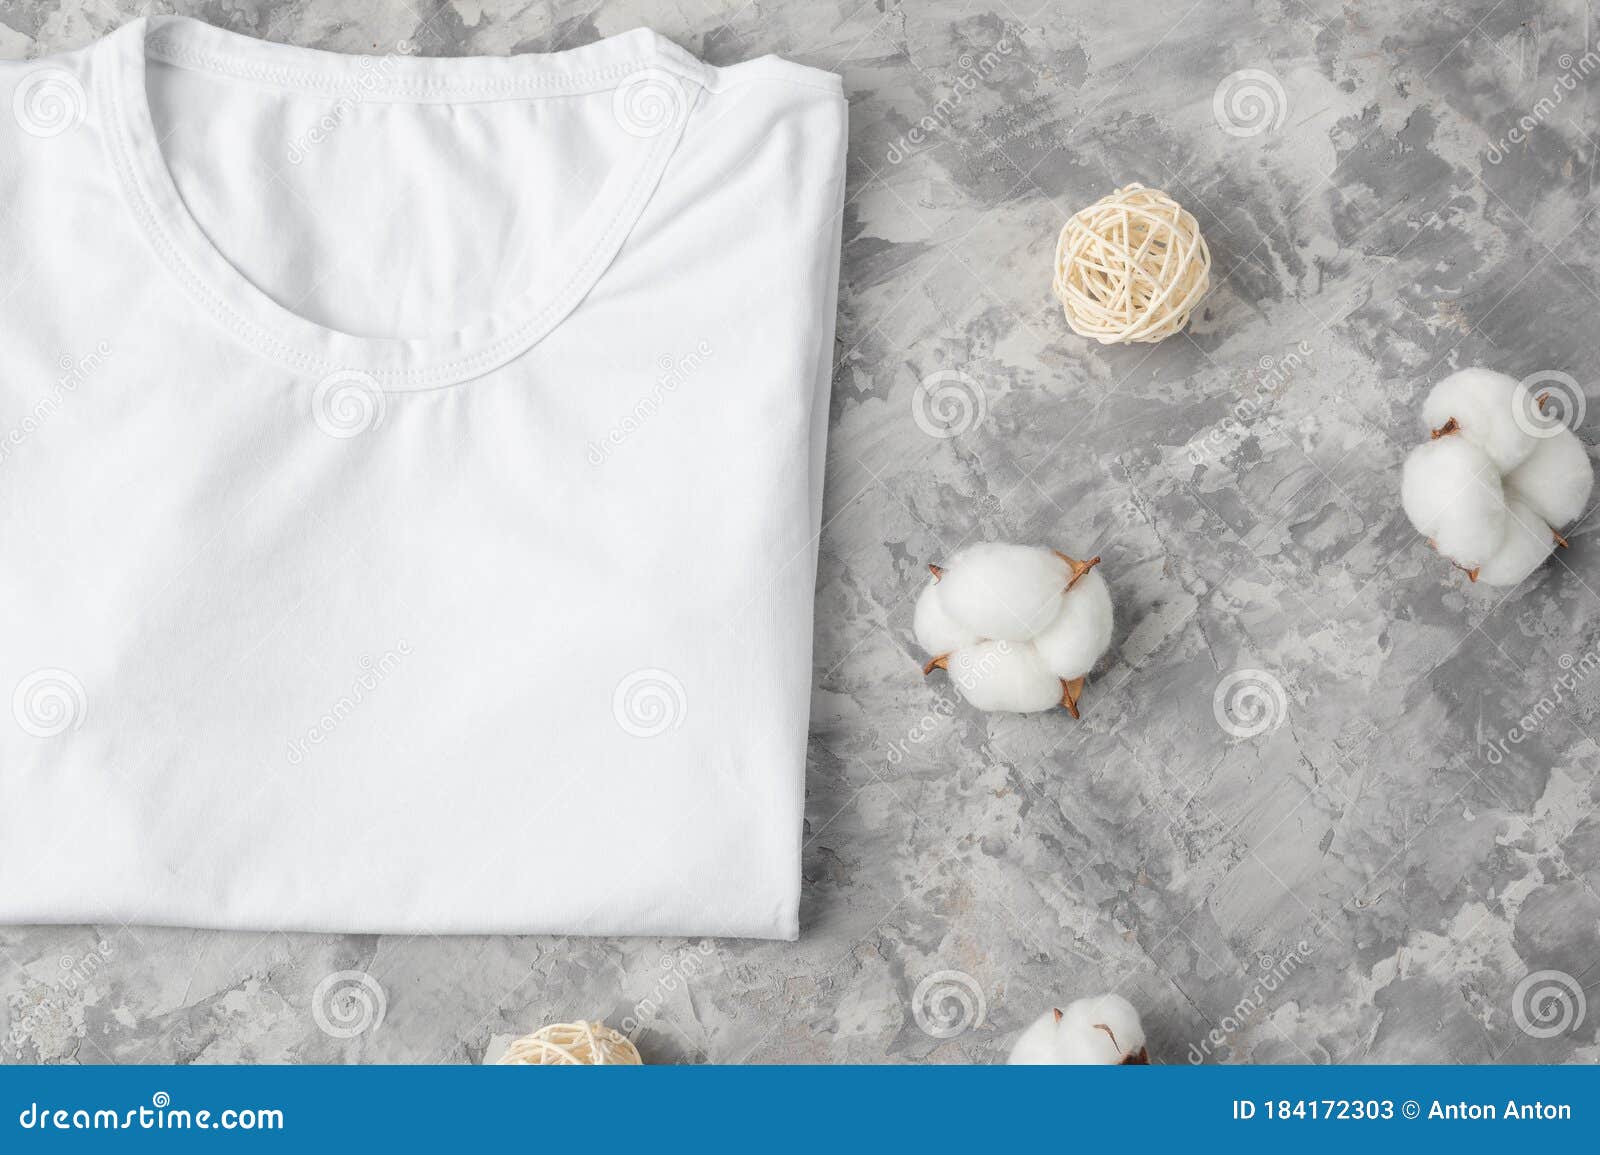 Flat Lay Layout for Design, White Mockup T-shirt for Placing Fonts ...